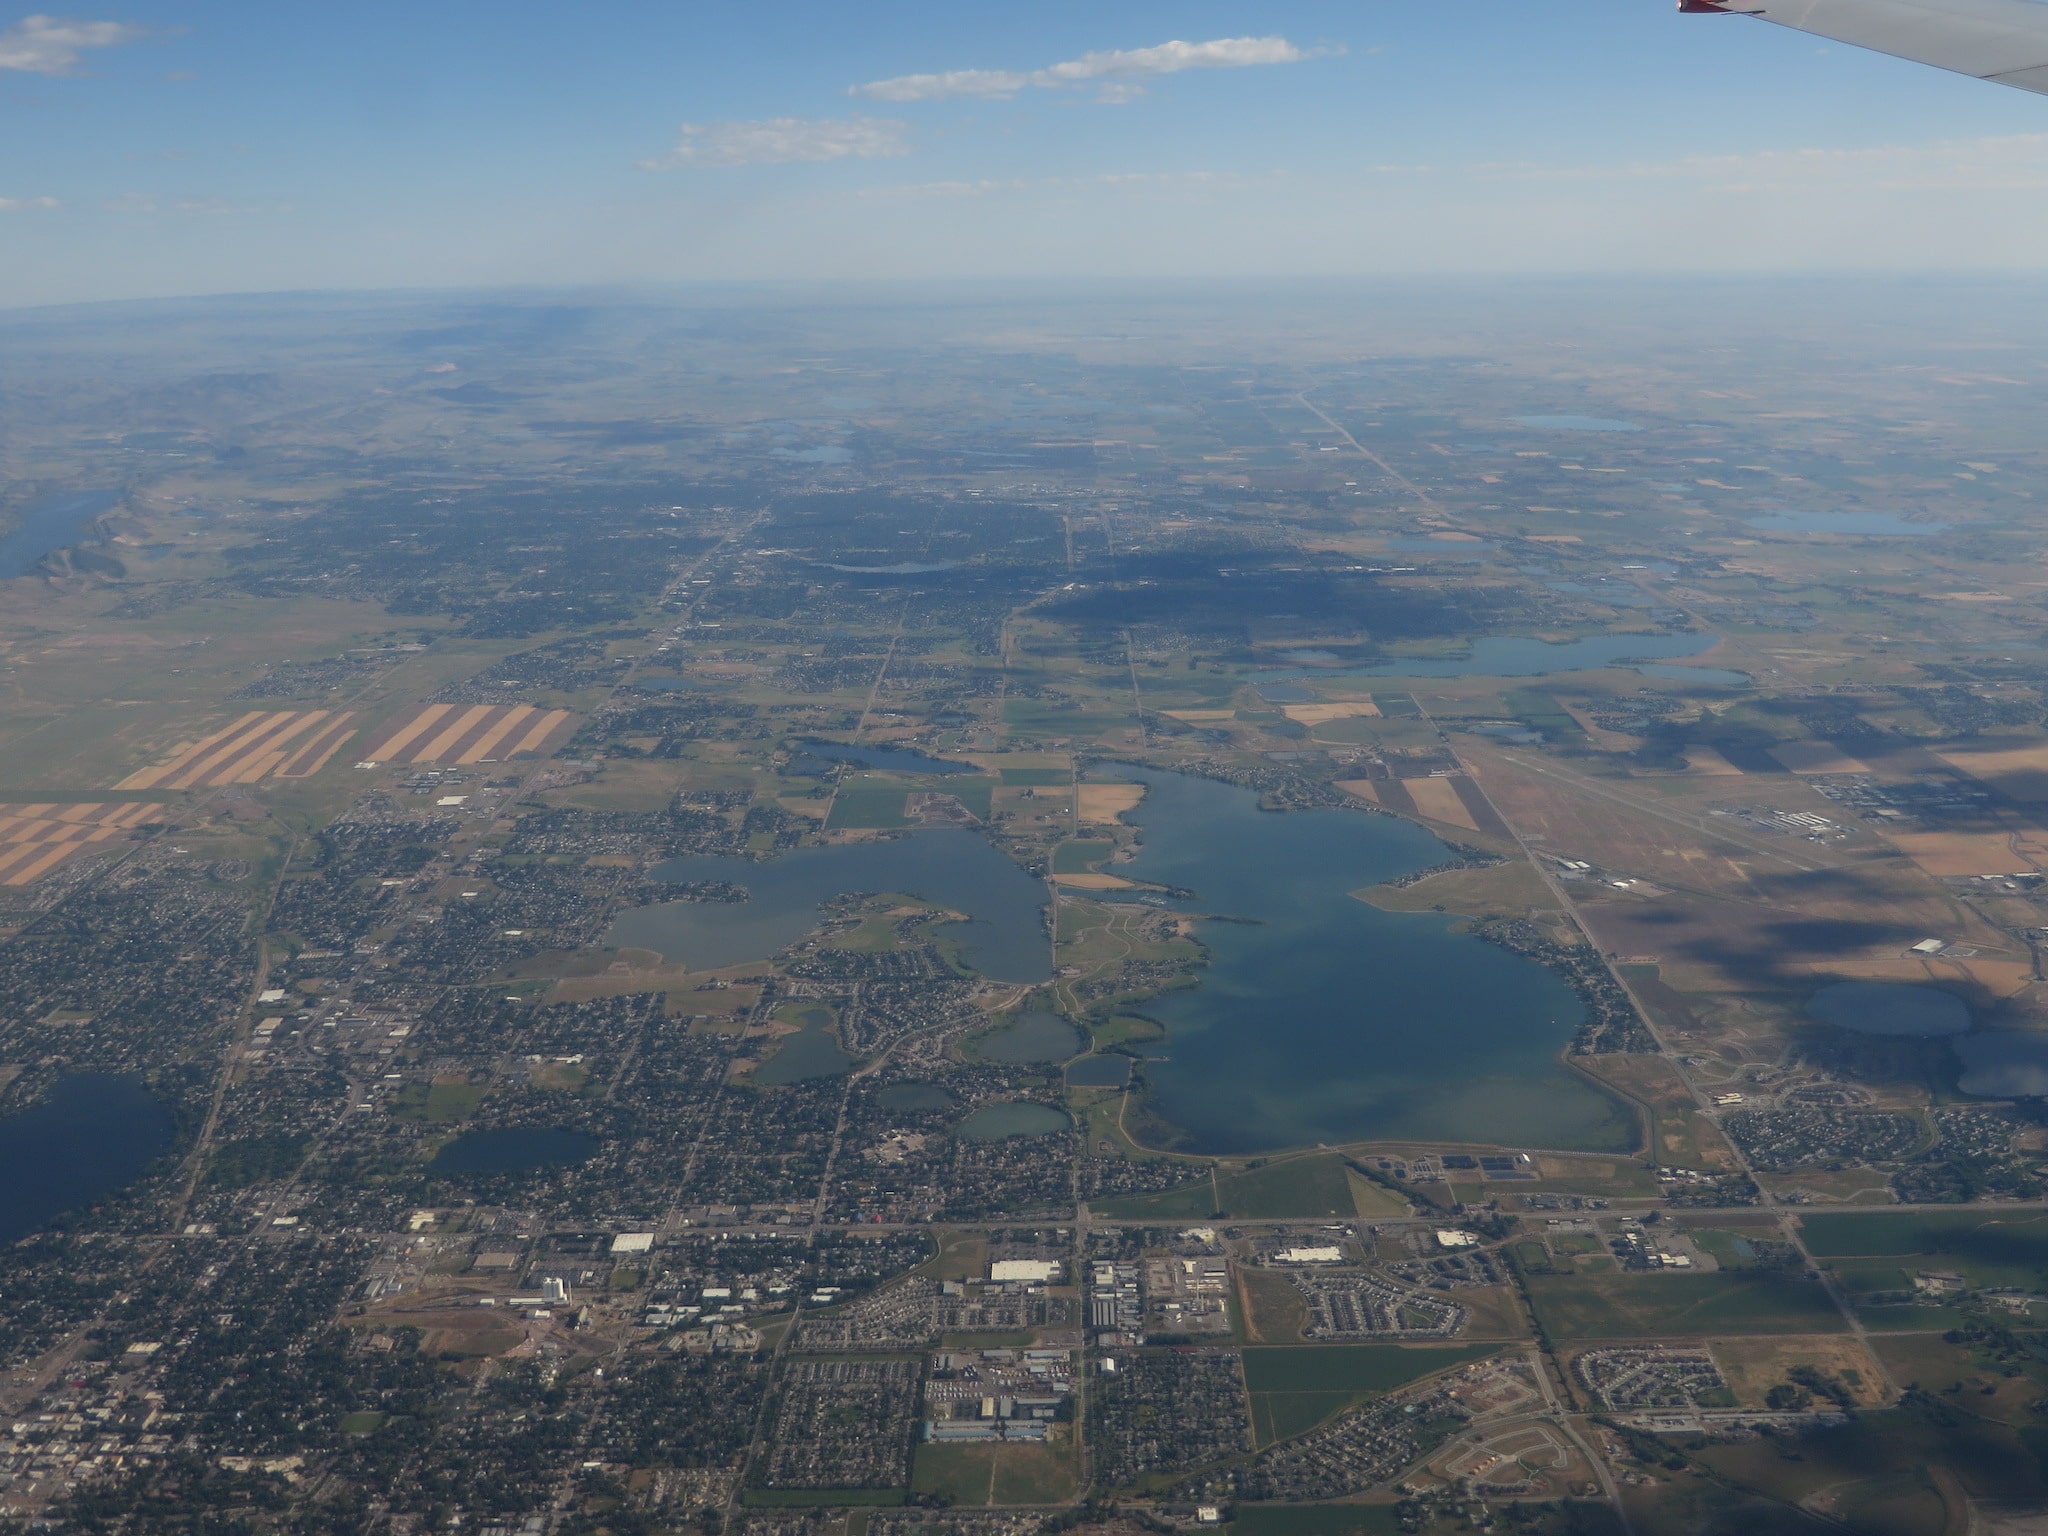 A birds-eye view of the patchwork of lakes and reservoirs near Loveland, Colorado.